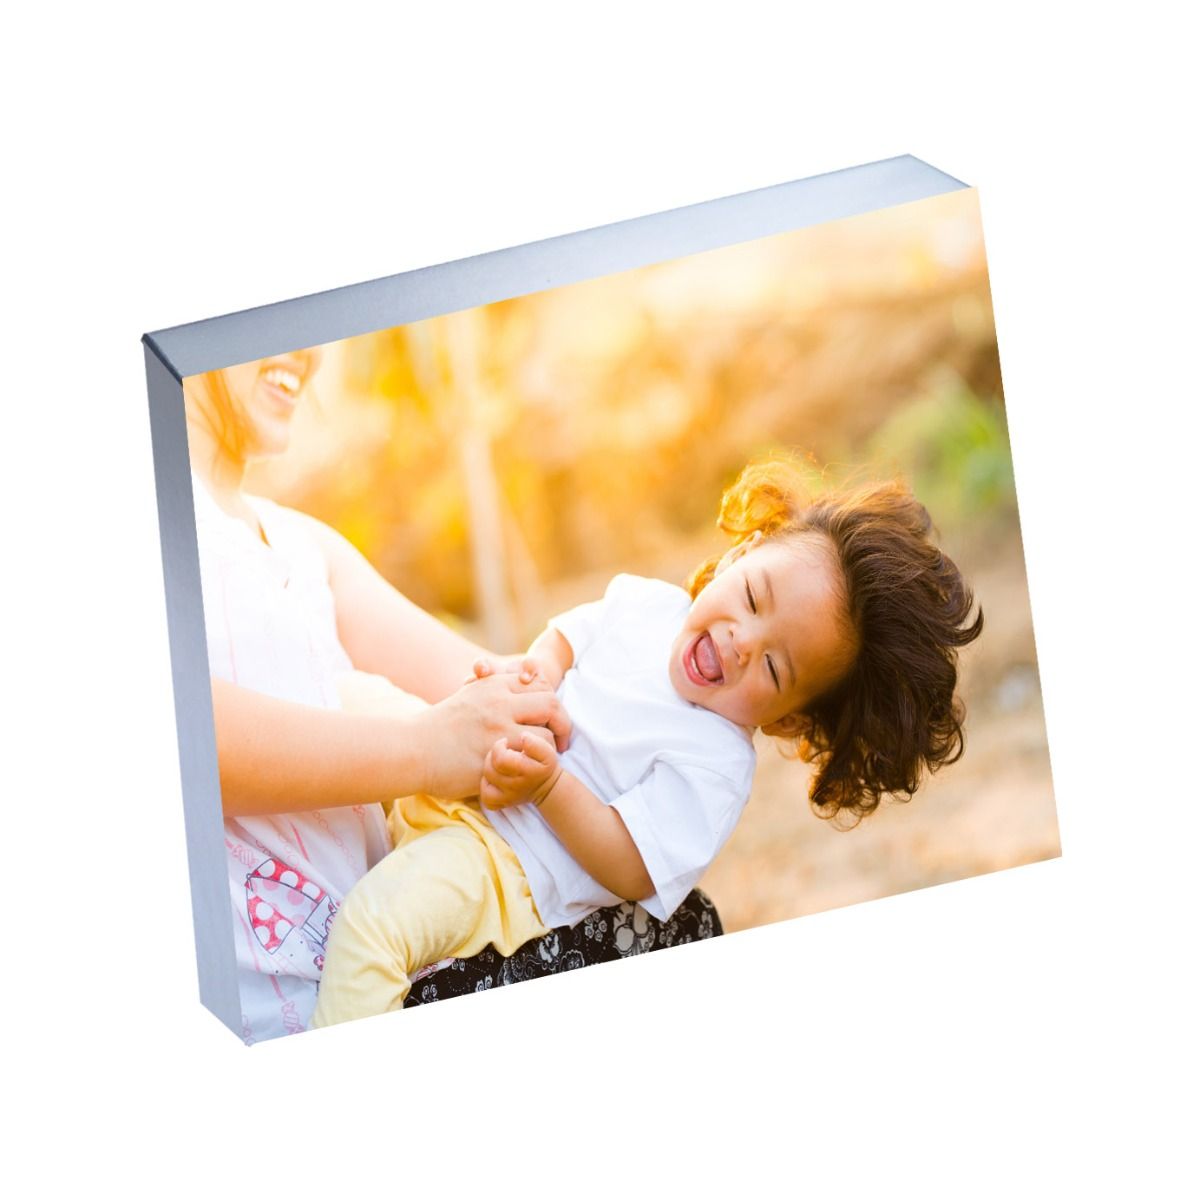 Silver Linings Photo Mounting Frame [Self-Adhesive, Silver, 8"x10"] 10 /Box